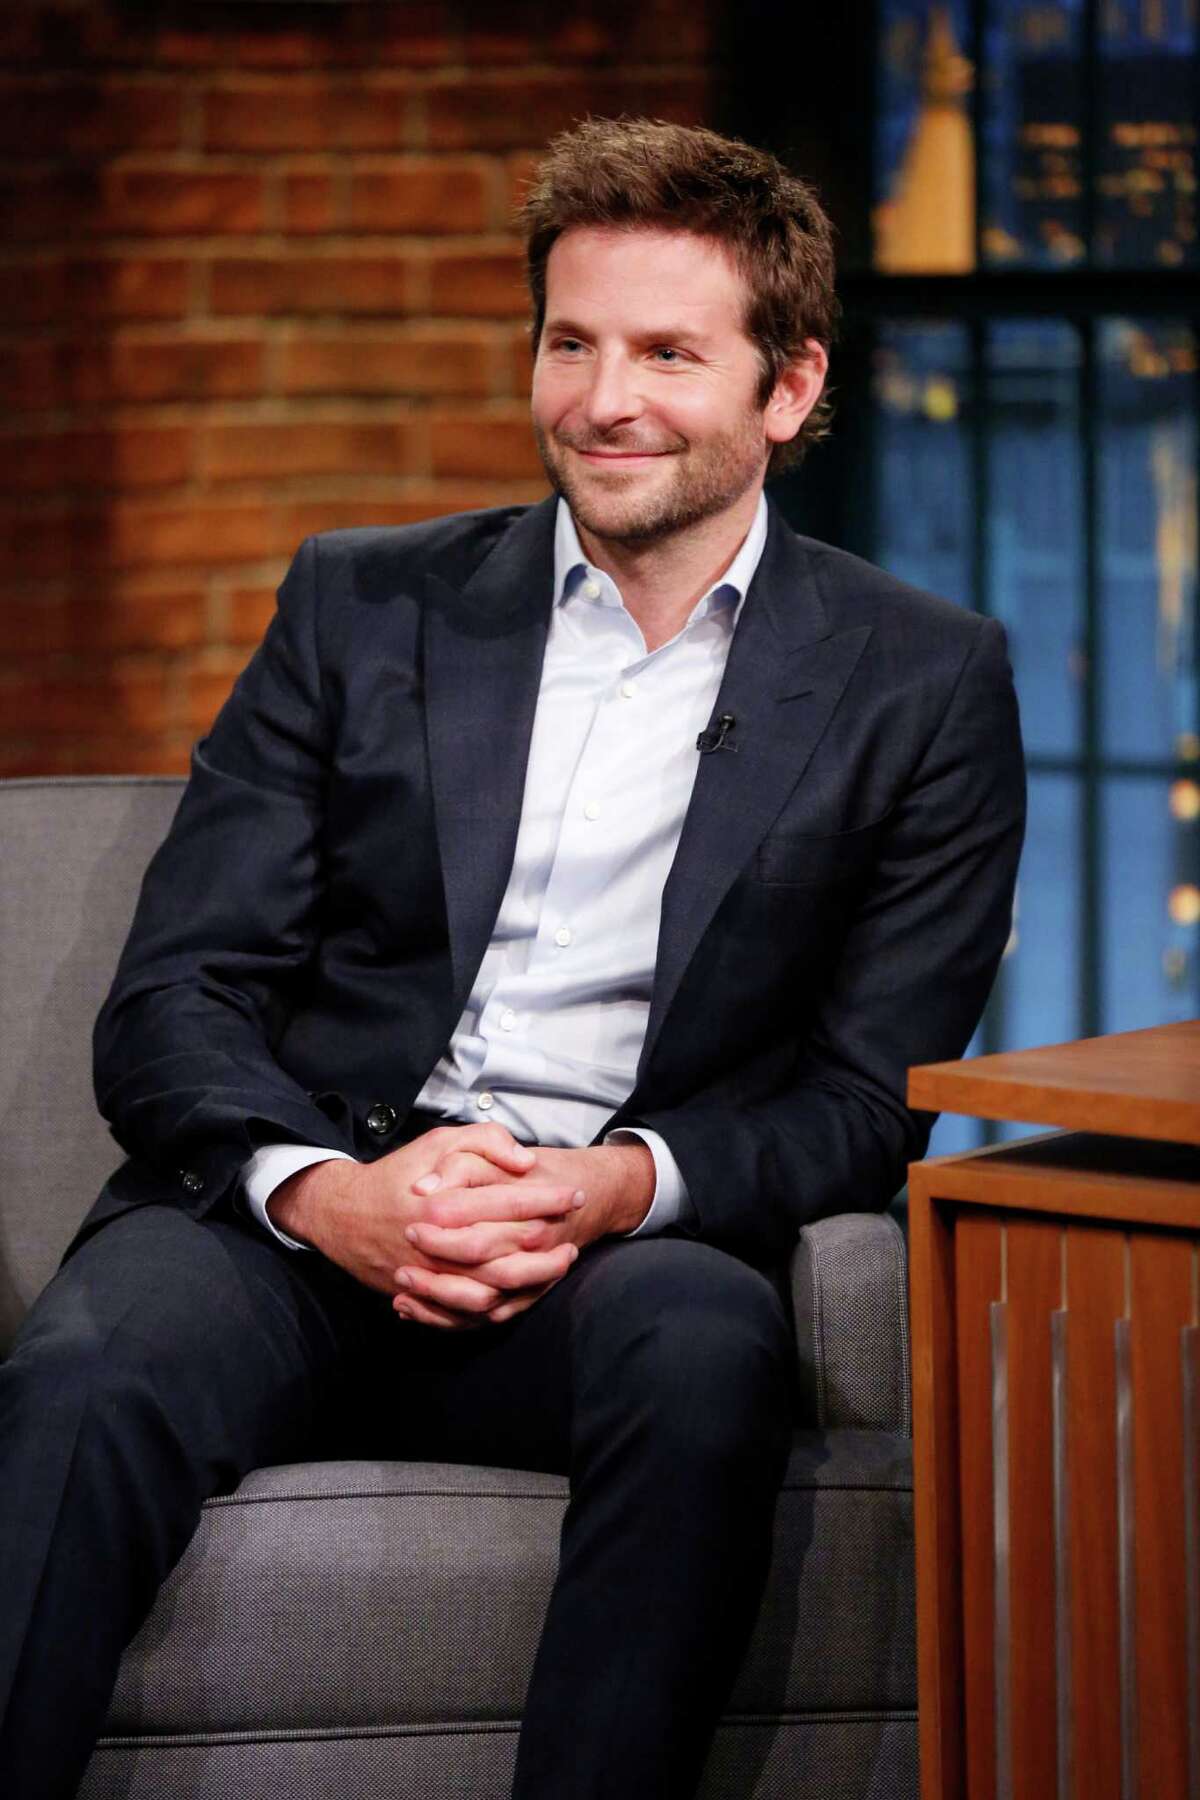 Bradley Cooper How Kim K. is connected: After her split from Reggie Bush, Kim had a rumored hook-up in 2010 with soccer star Cristiano Ronaldo, who is model Irina Shayk's ex-boyfriend. Shayk is Cooper's current girlfriend.